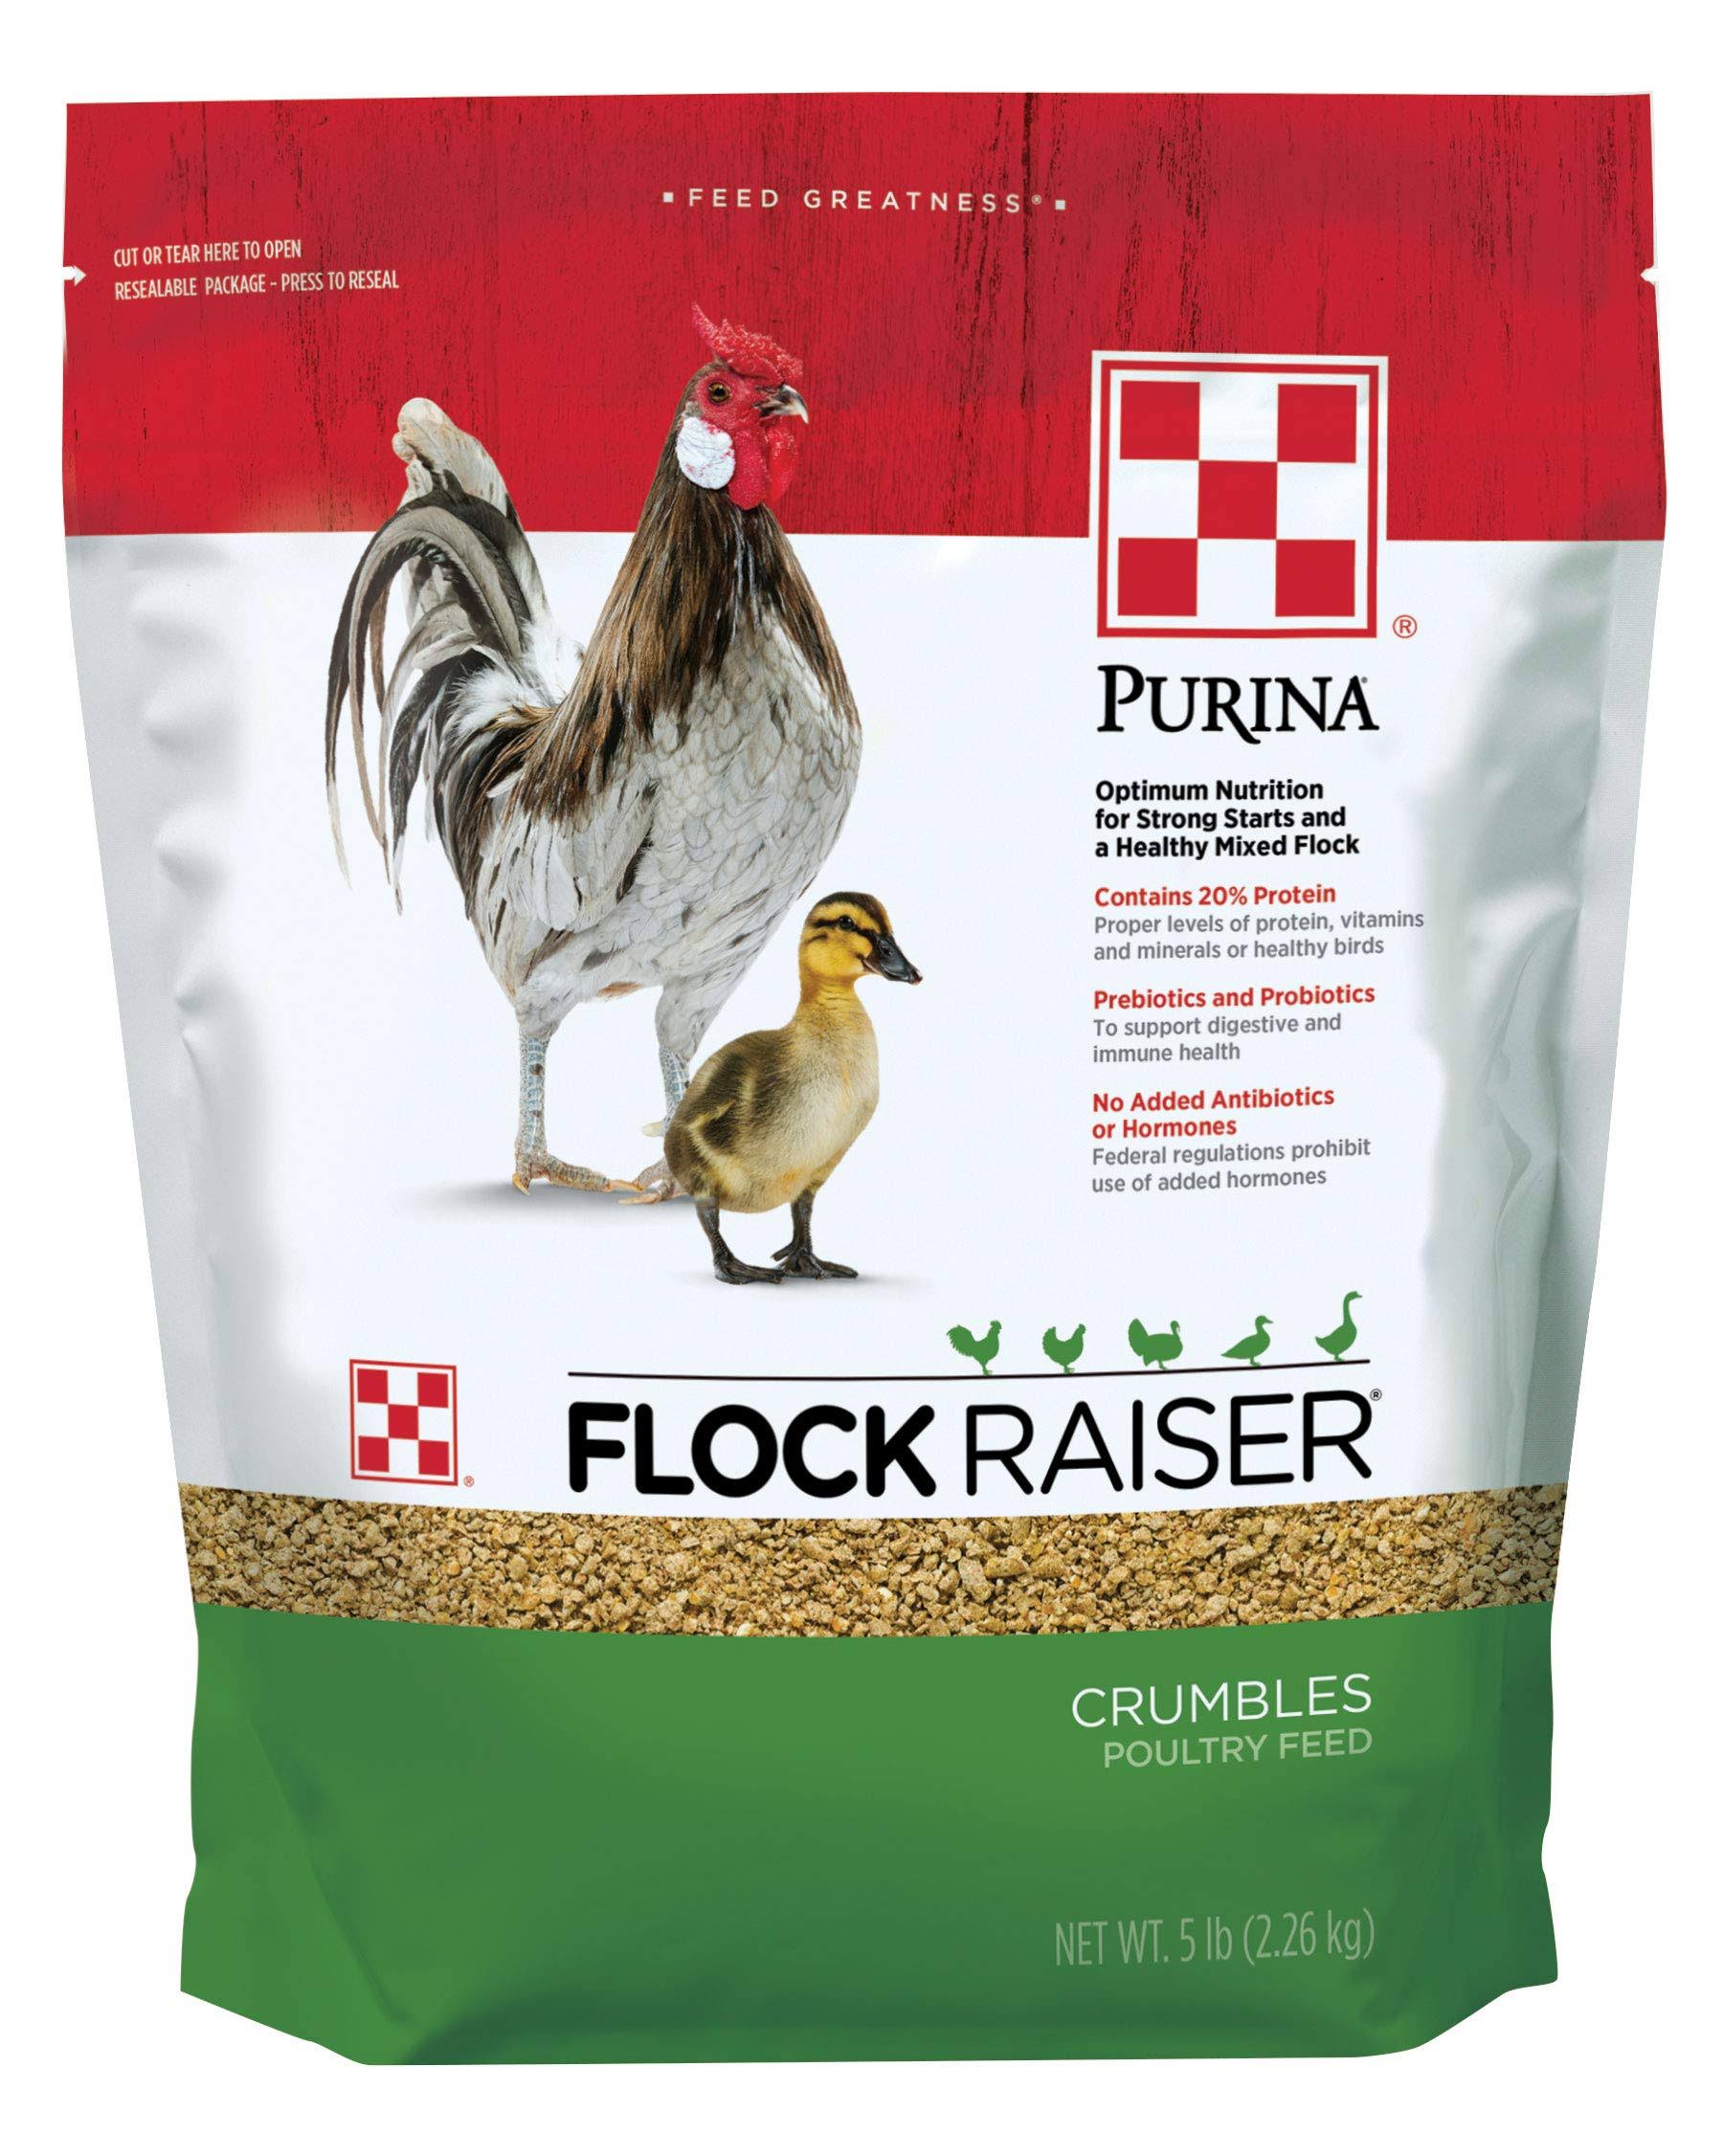 Purina Flock Raiser Poultry Feed Crumbles, 5 lb. Bag